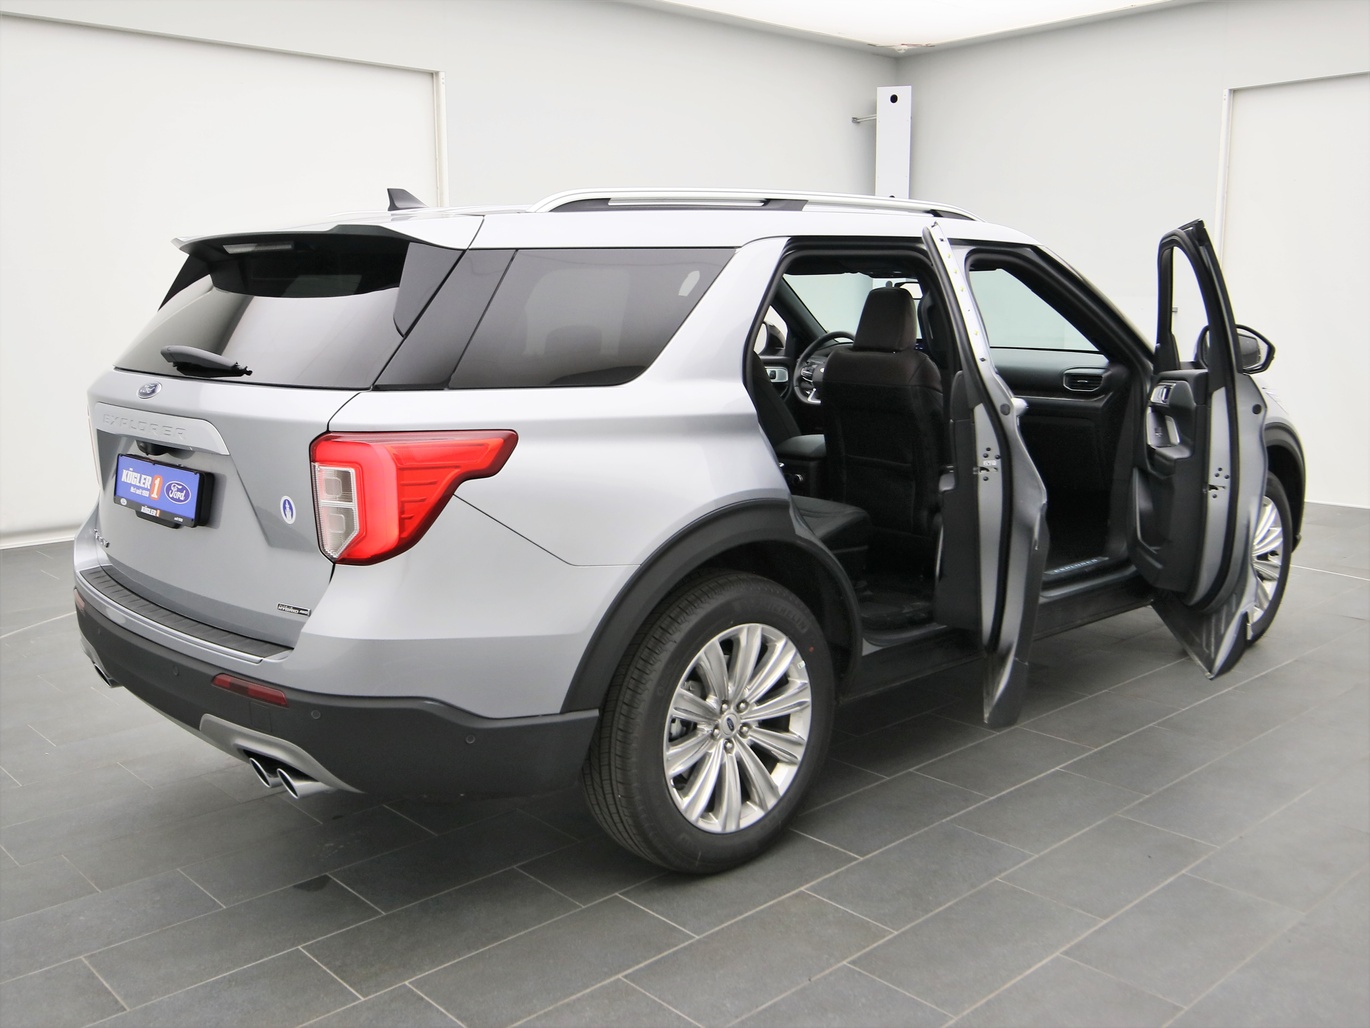  Ford Explorer Platinum 457PS Plug-in-Hybrid / PDC in Iconic Silver 